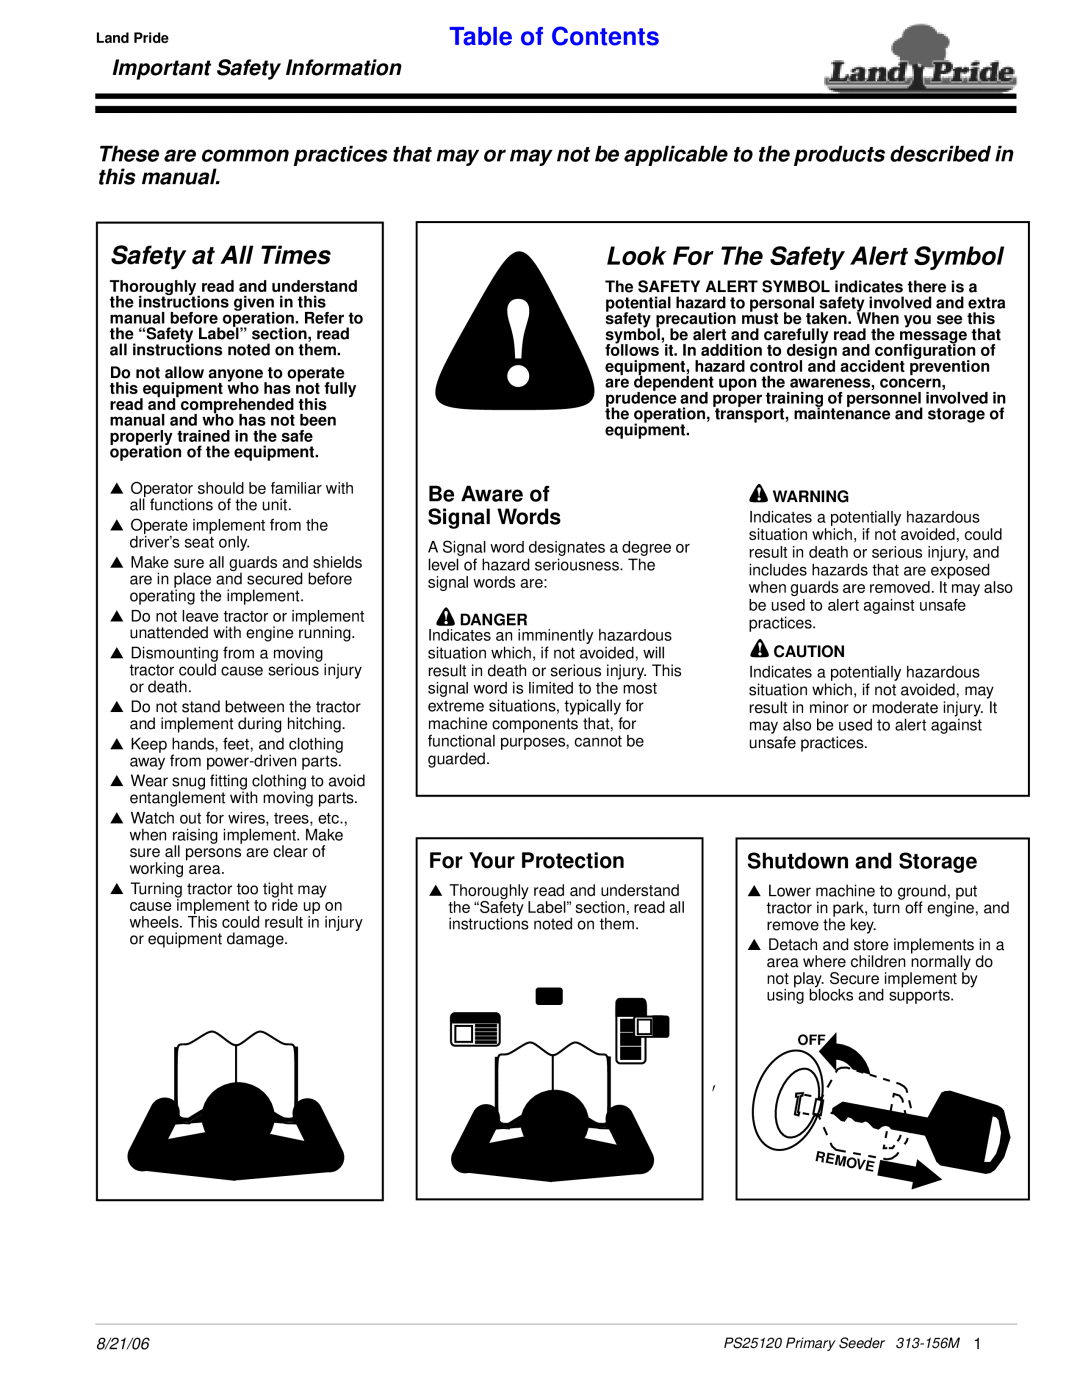 Land Pride PS25120 Safety at All Times, Look For The Safety Alert Symbol, Table of Contents, Important Safety Information 